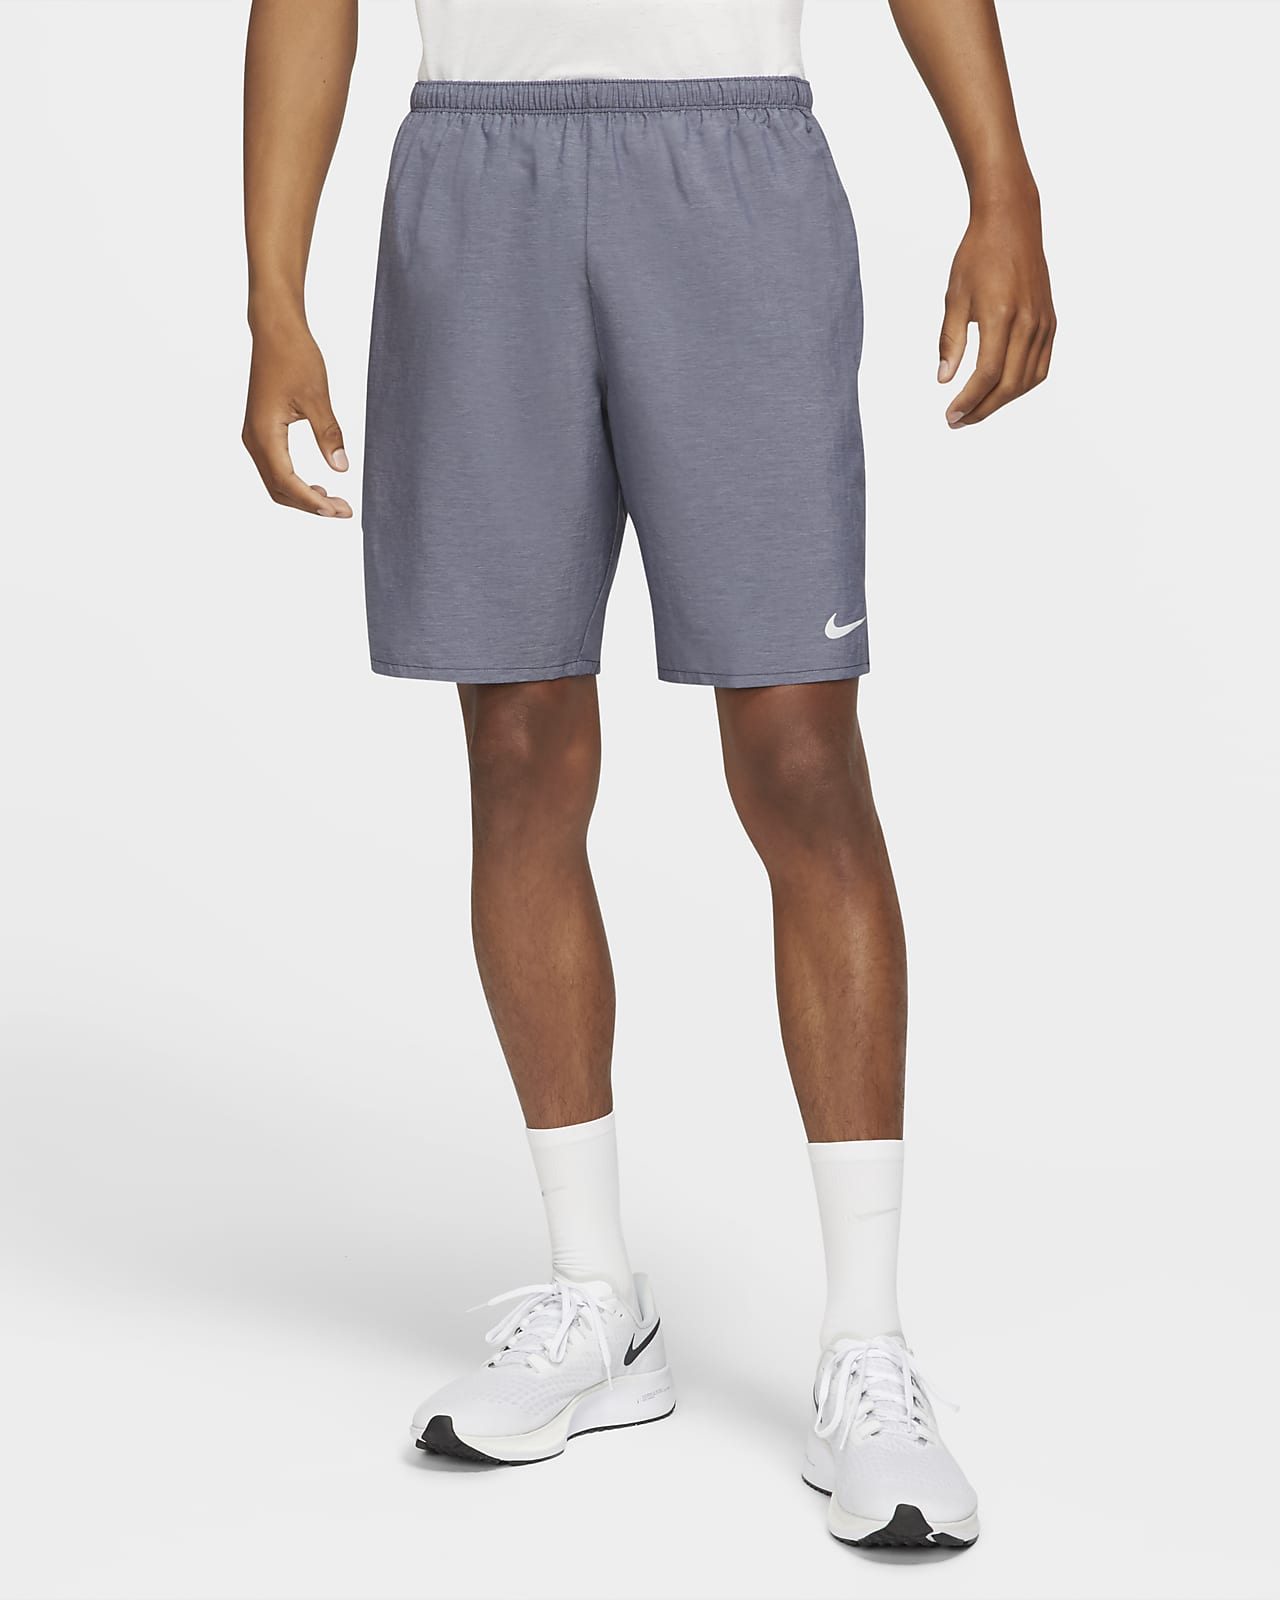 Brief-Lined Running Shorts. Nike 